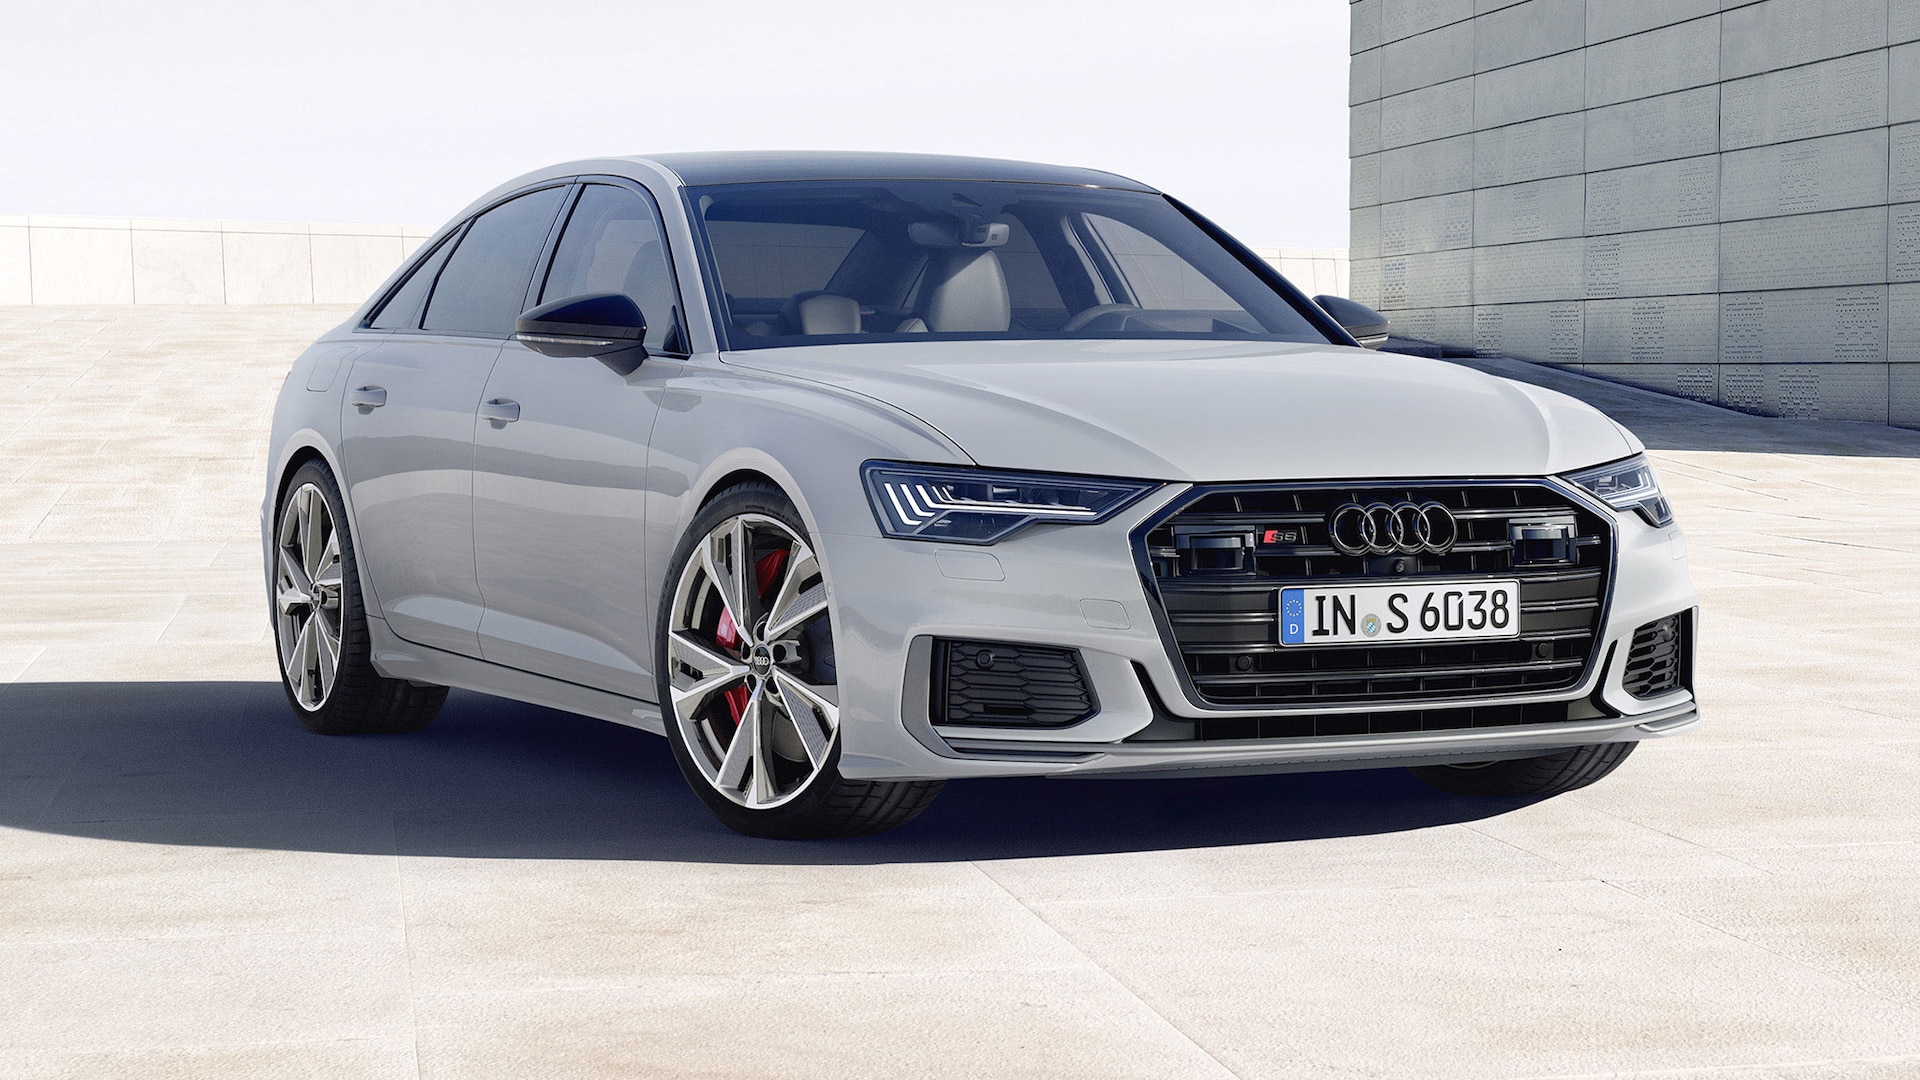 2023 Audi S6 Prices, Reviews, and Photos - MotorTrend